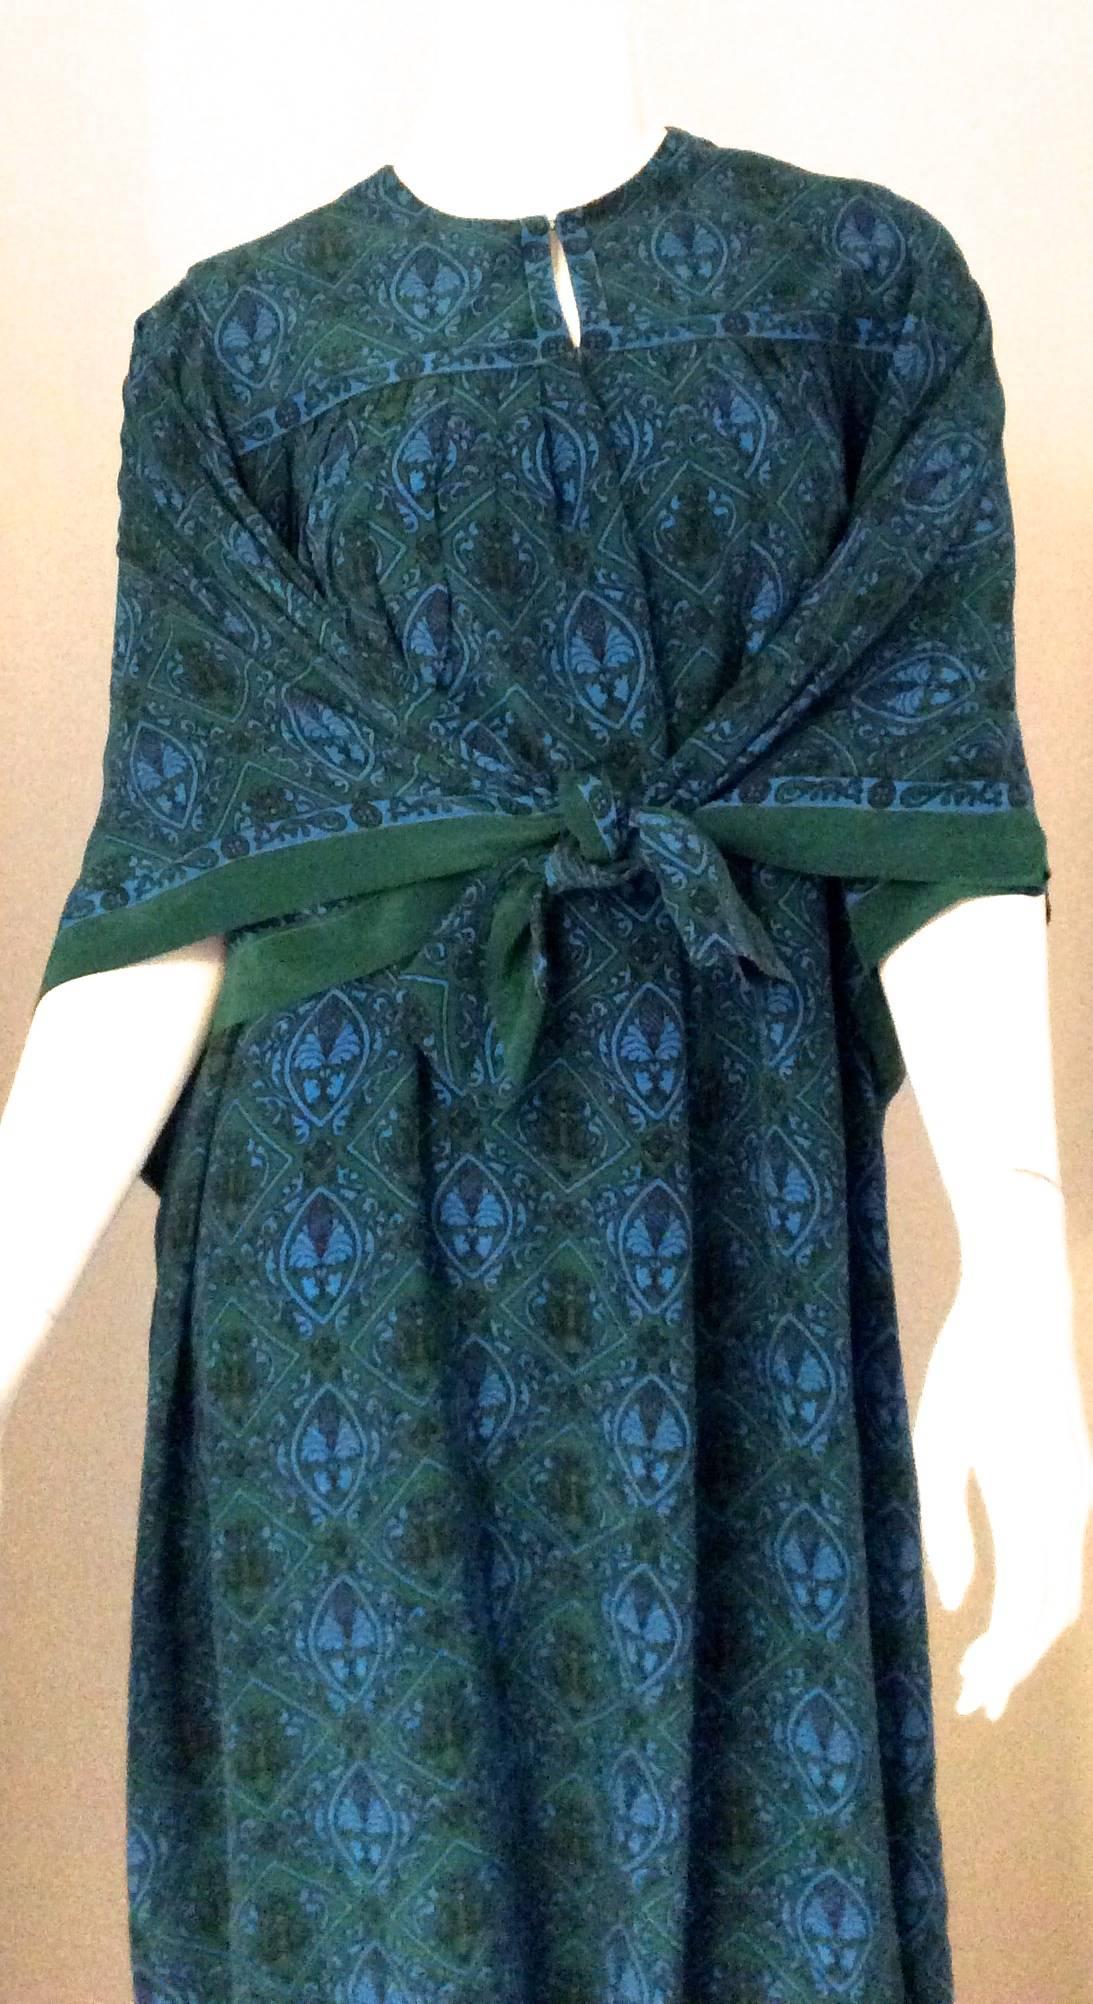 Presented here is a magnificent Serge Lepage Schiaparelli Caftan dress. The dress is an emerald green background with a turquoise blue geometric design.  The front of the dress has an opening of 8 inches with two snap closures. The dress is not